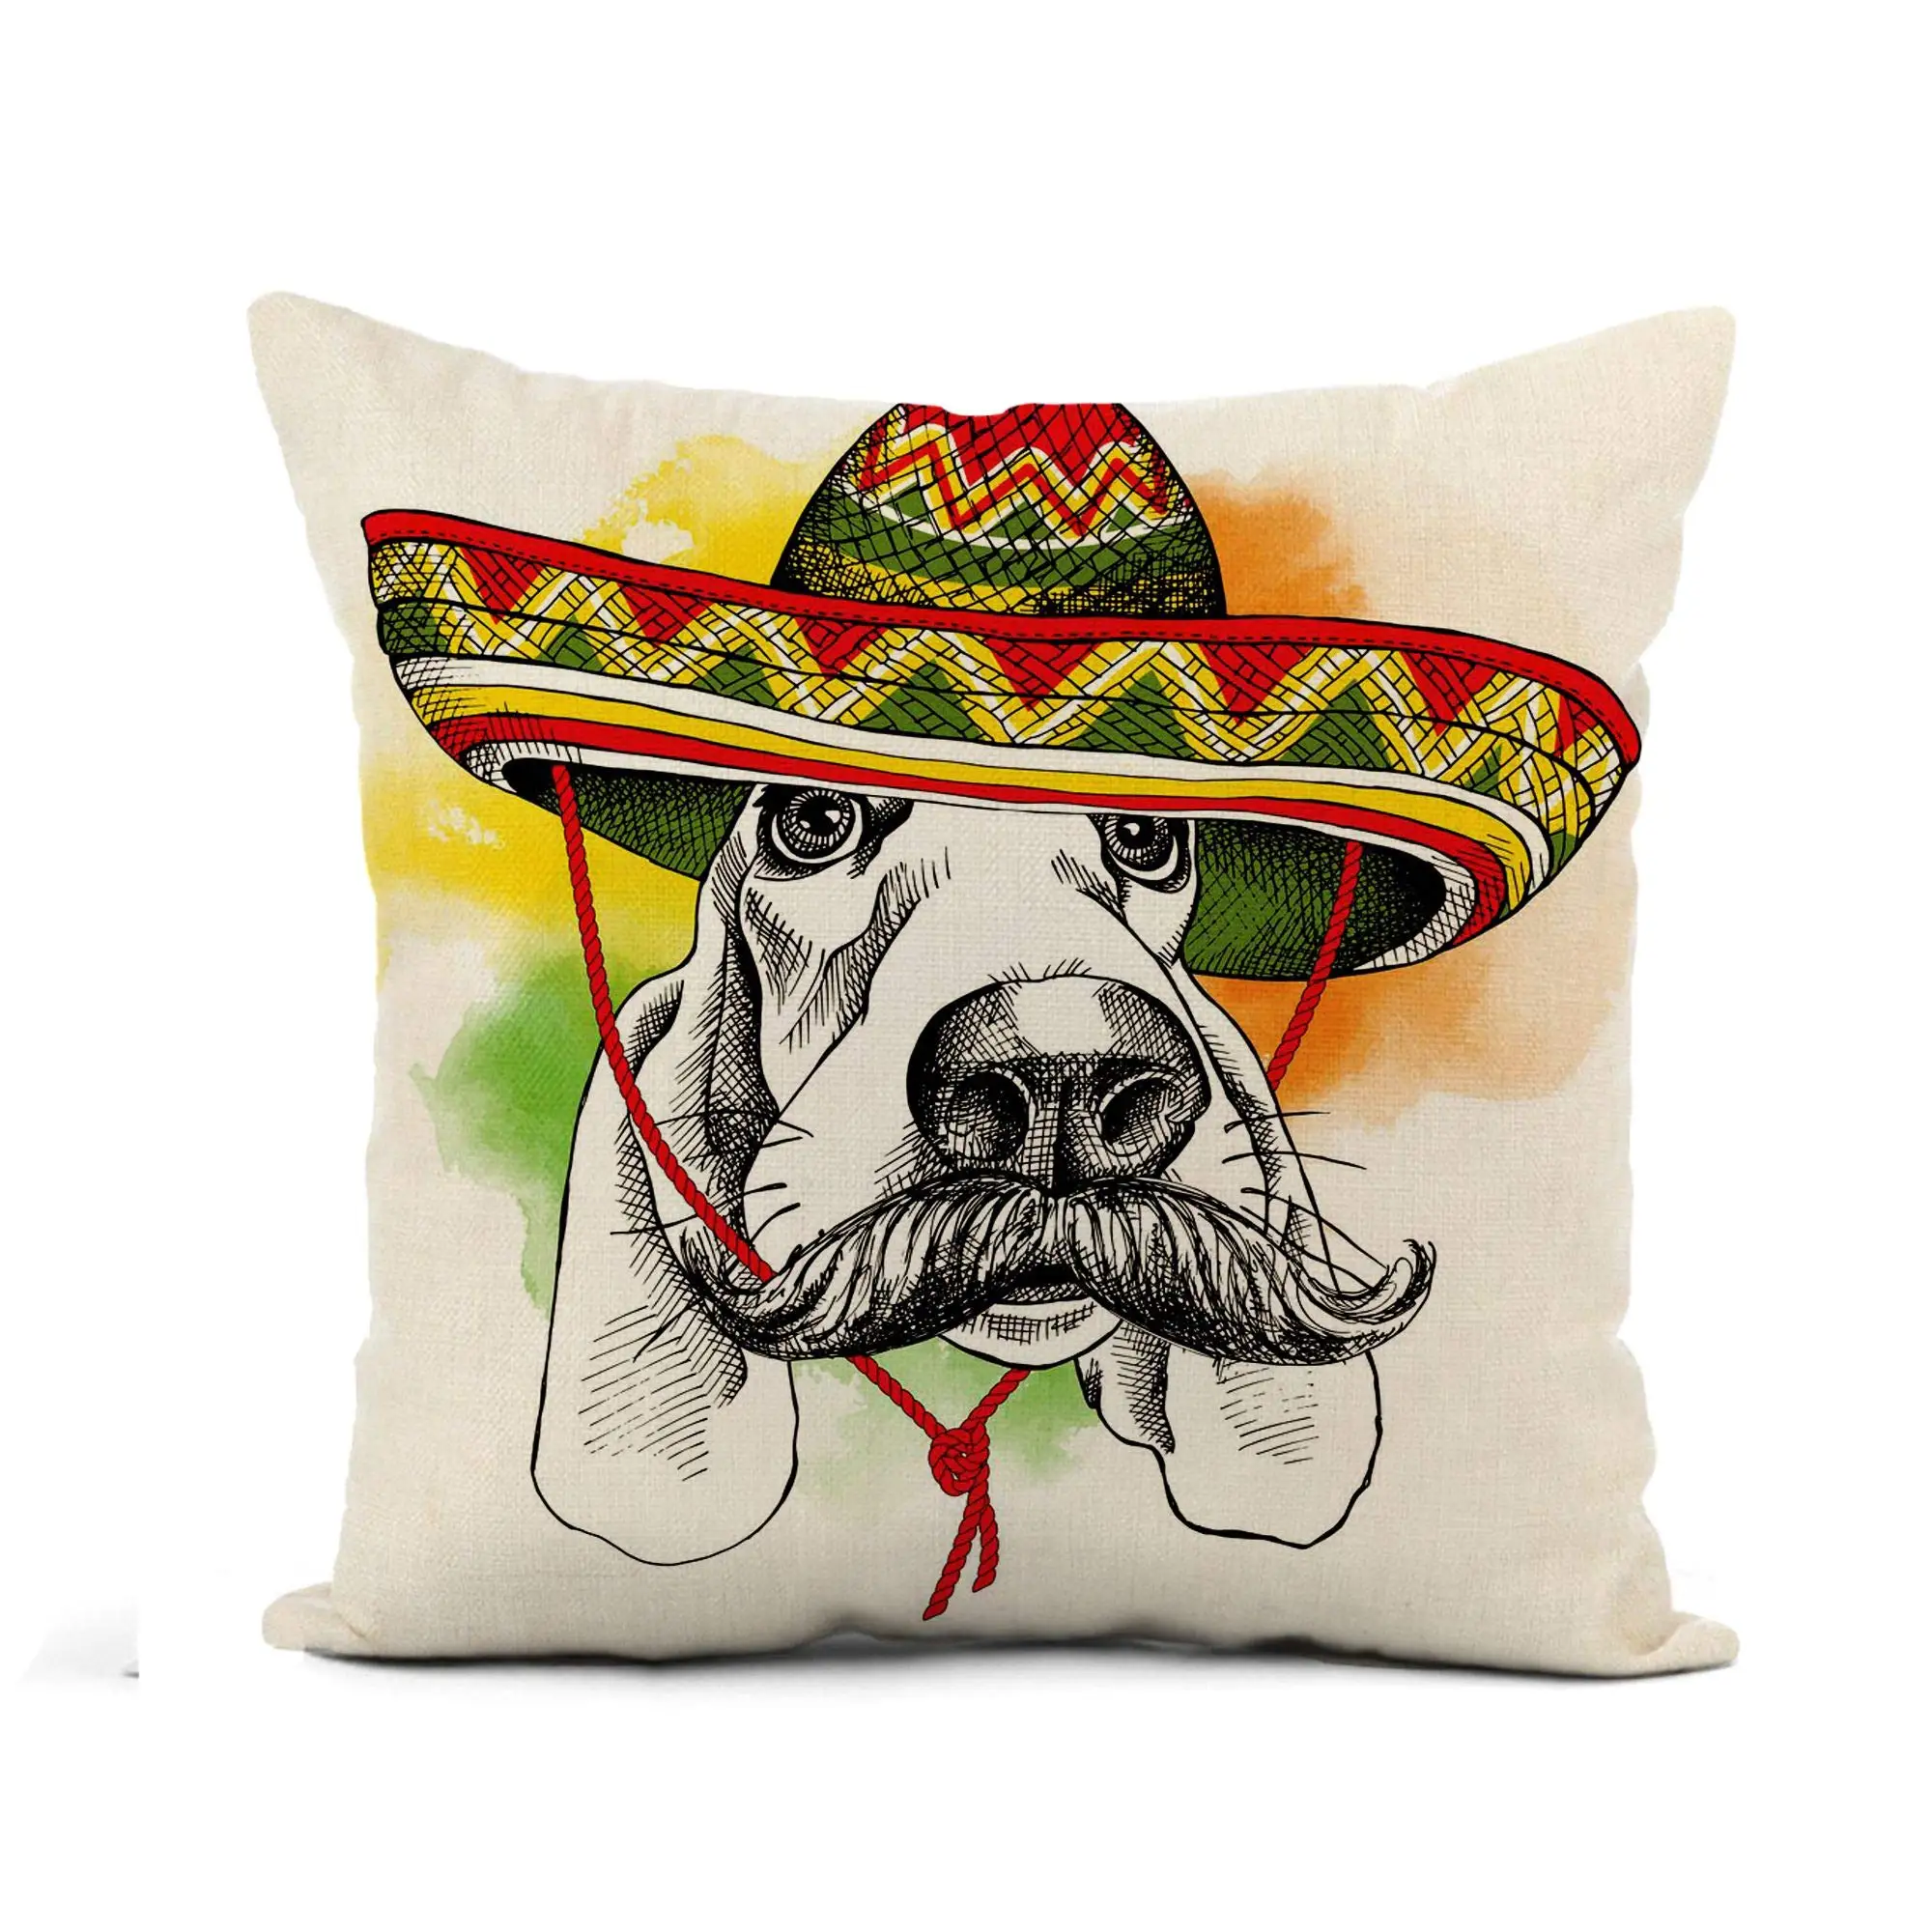 

Flax Throw Pillow Cover Cool Portrait of Dog Basset Hound Mustache in Mexico 16x16 Inches Pillowcase Home Decor Square Cotton